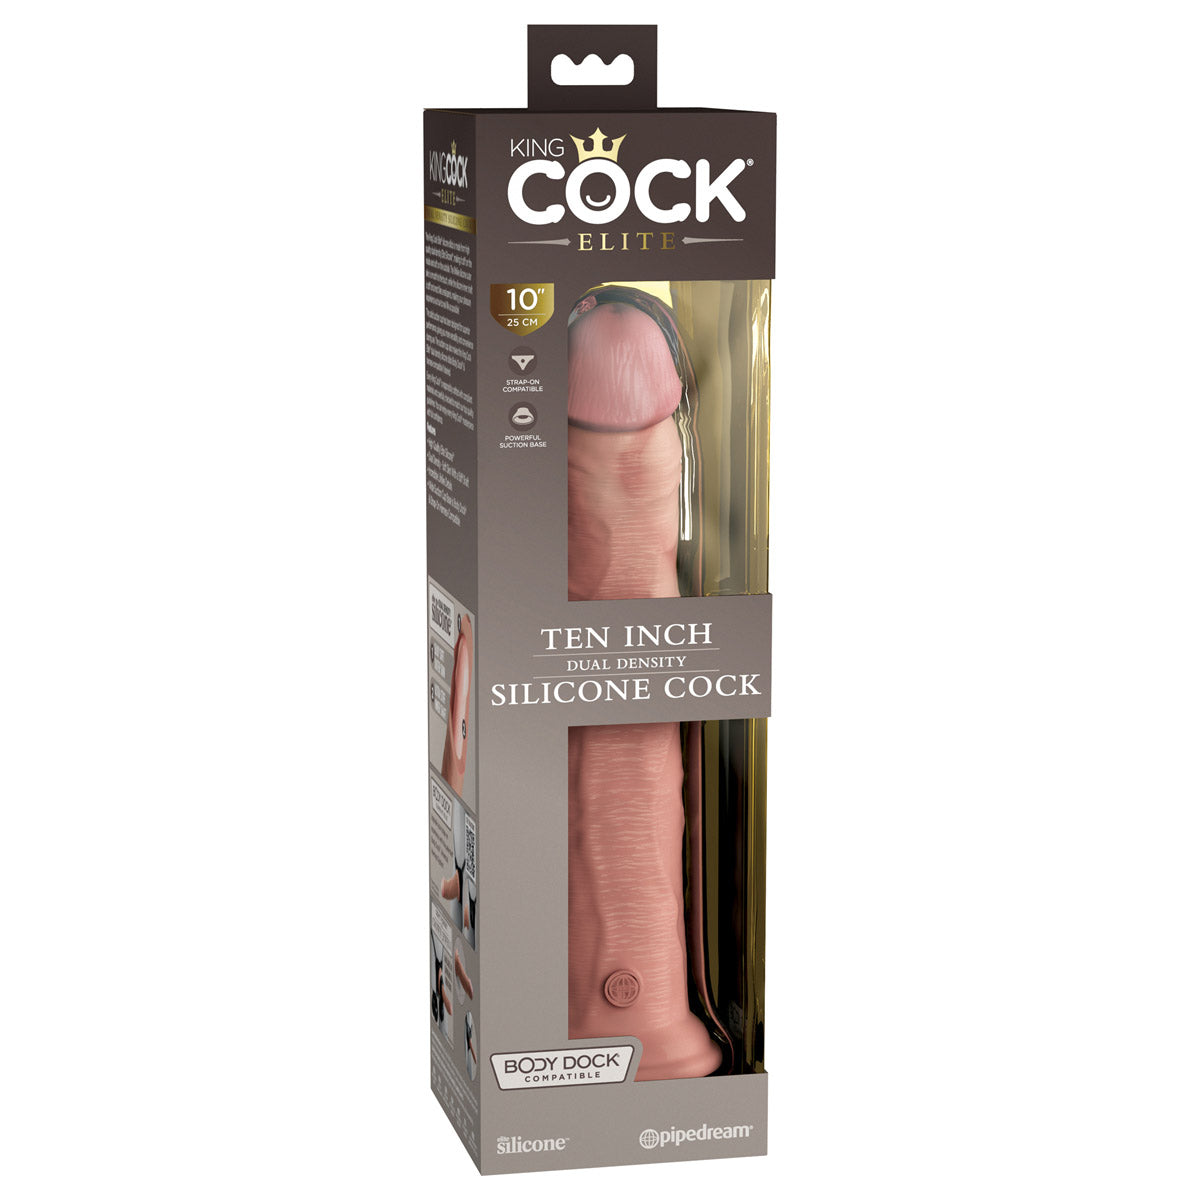 King Cock Elite 10" Silicone Dual Density Cock - Light - Thorn & Feather